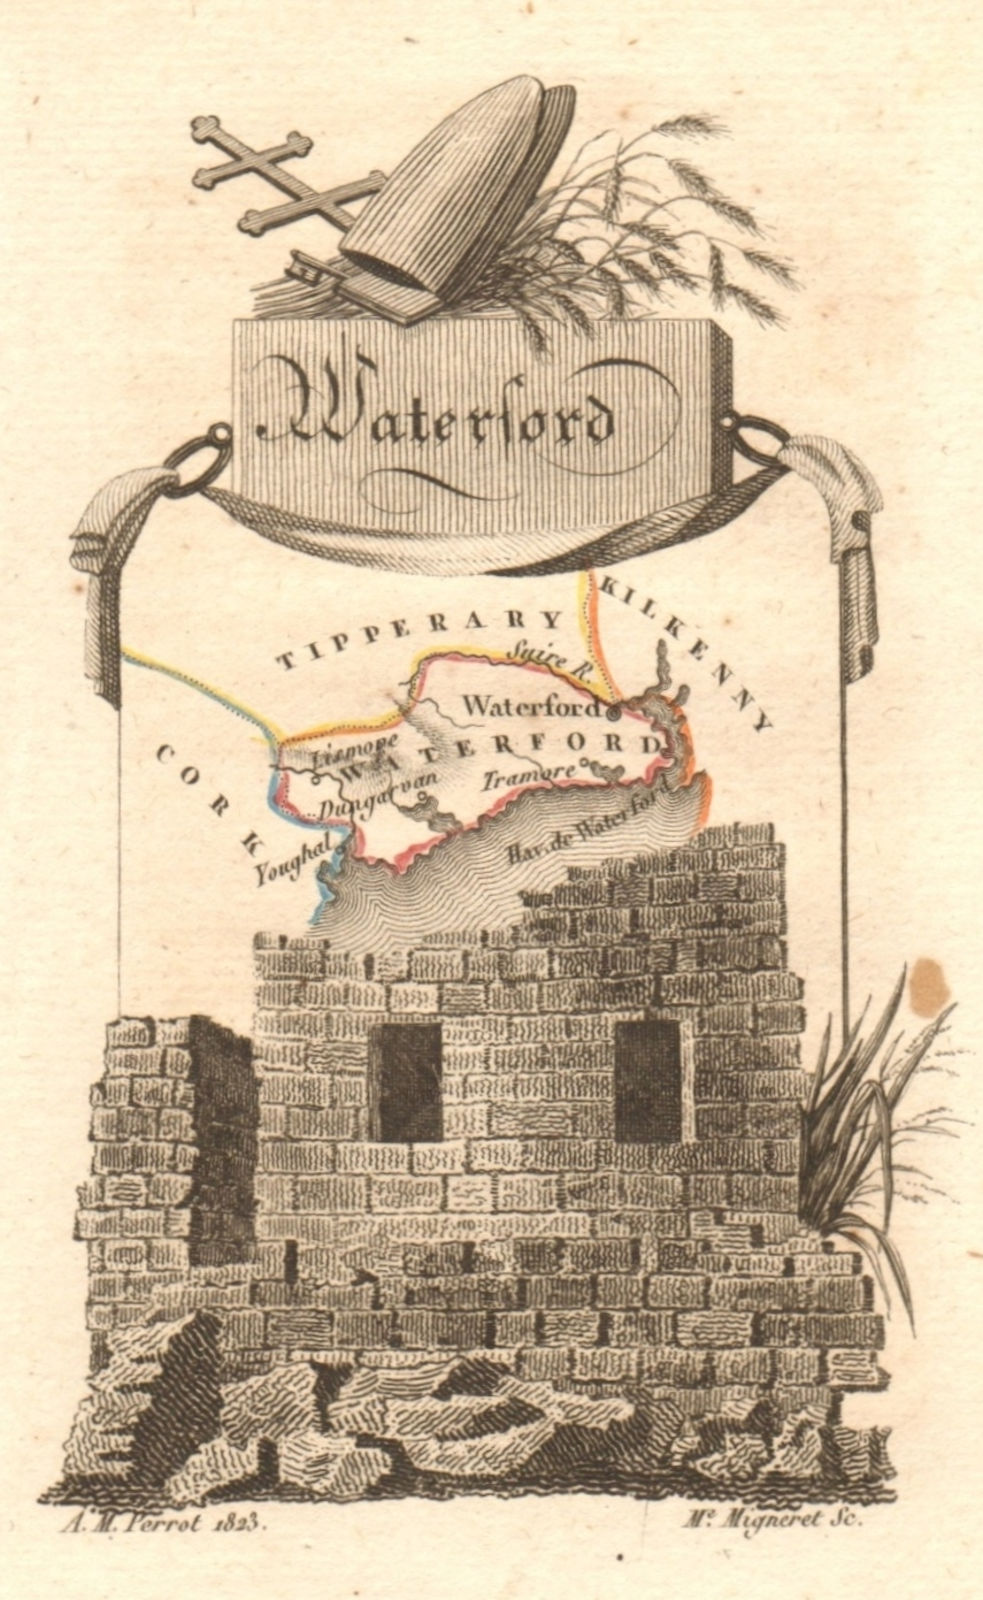 COUNTY WATERFORD antique county map by PERROT. Munster 1824 old